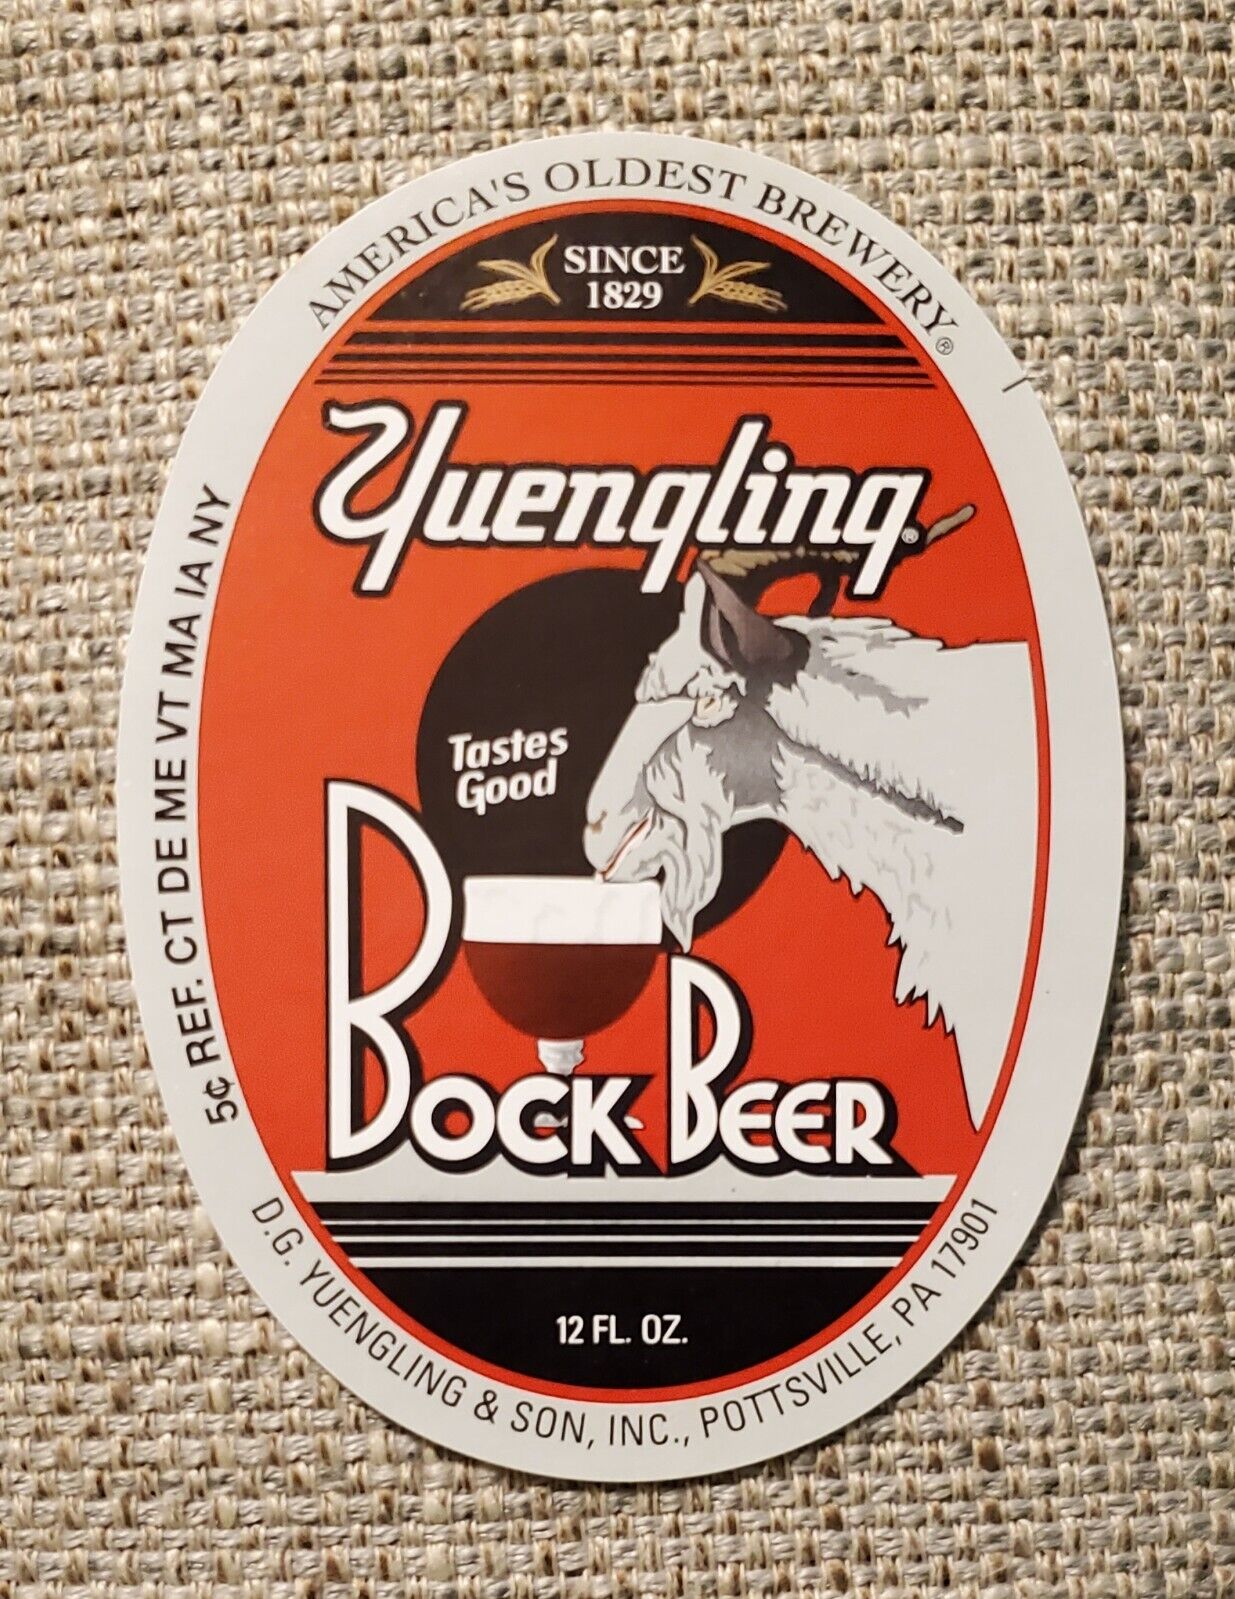 Yuengling Bock Beer 12 Oz Oval Label D G Yuengling & Son Inc Pottsville Pa